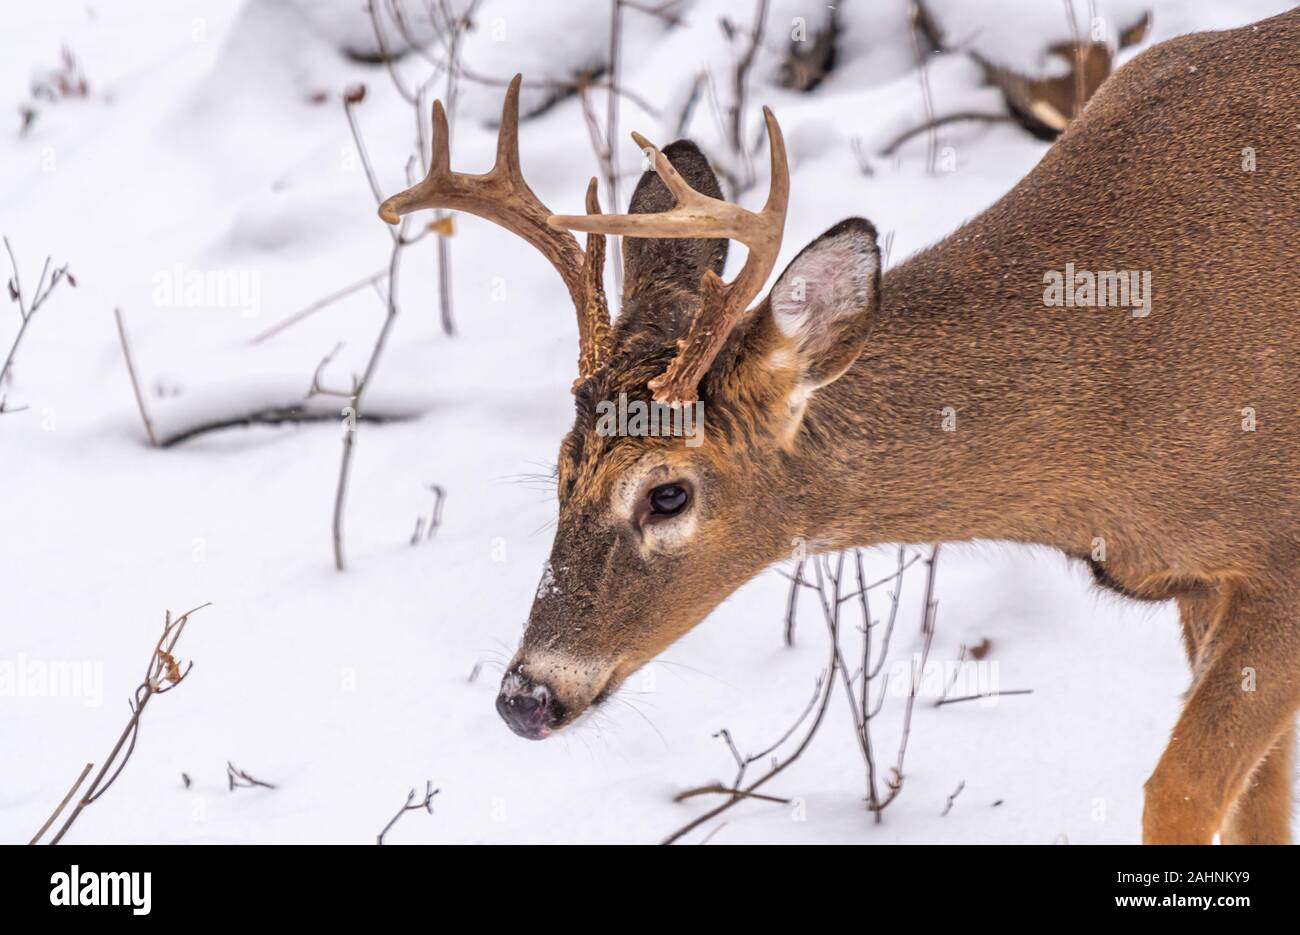 A closeup portrait of a white-tailed deer (Odocoileus virginianus) buck with large antlers walking on snow. Stock Photo